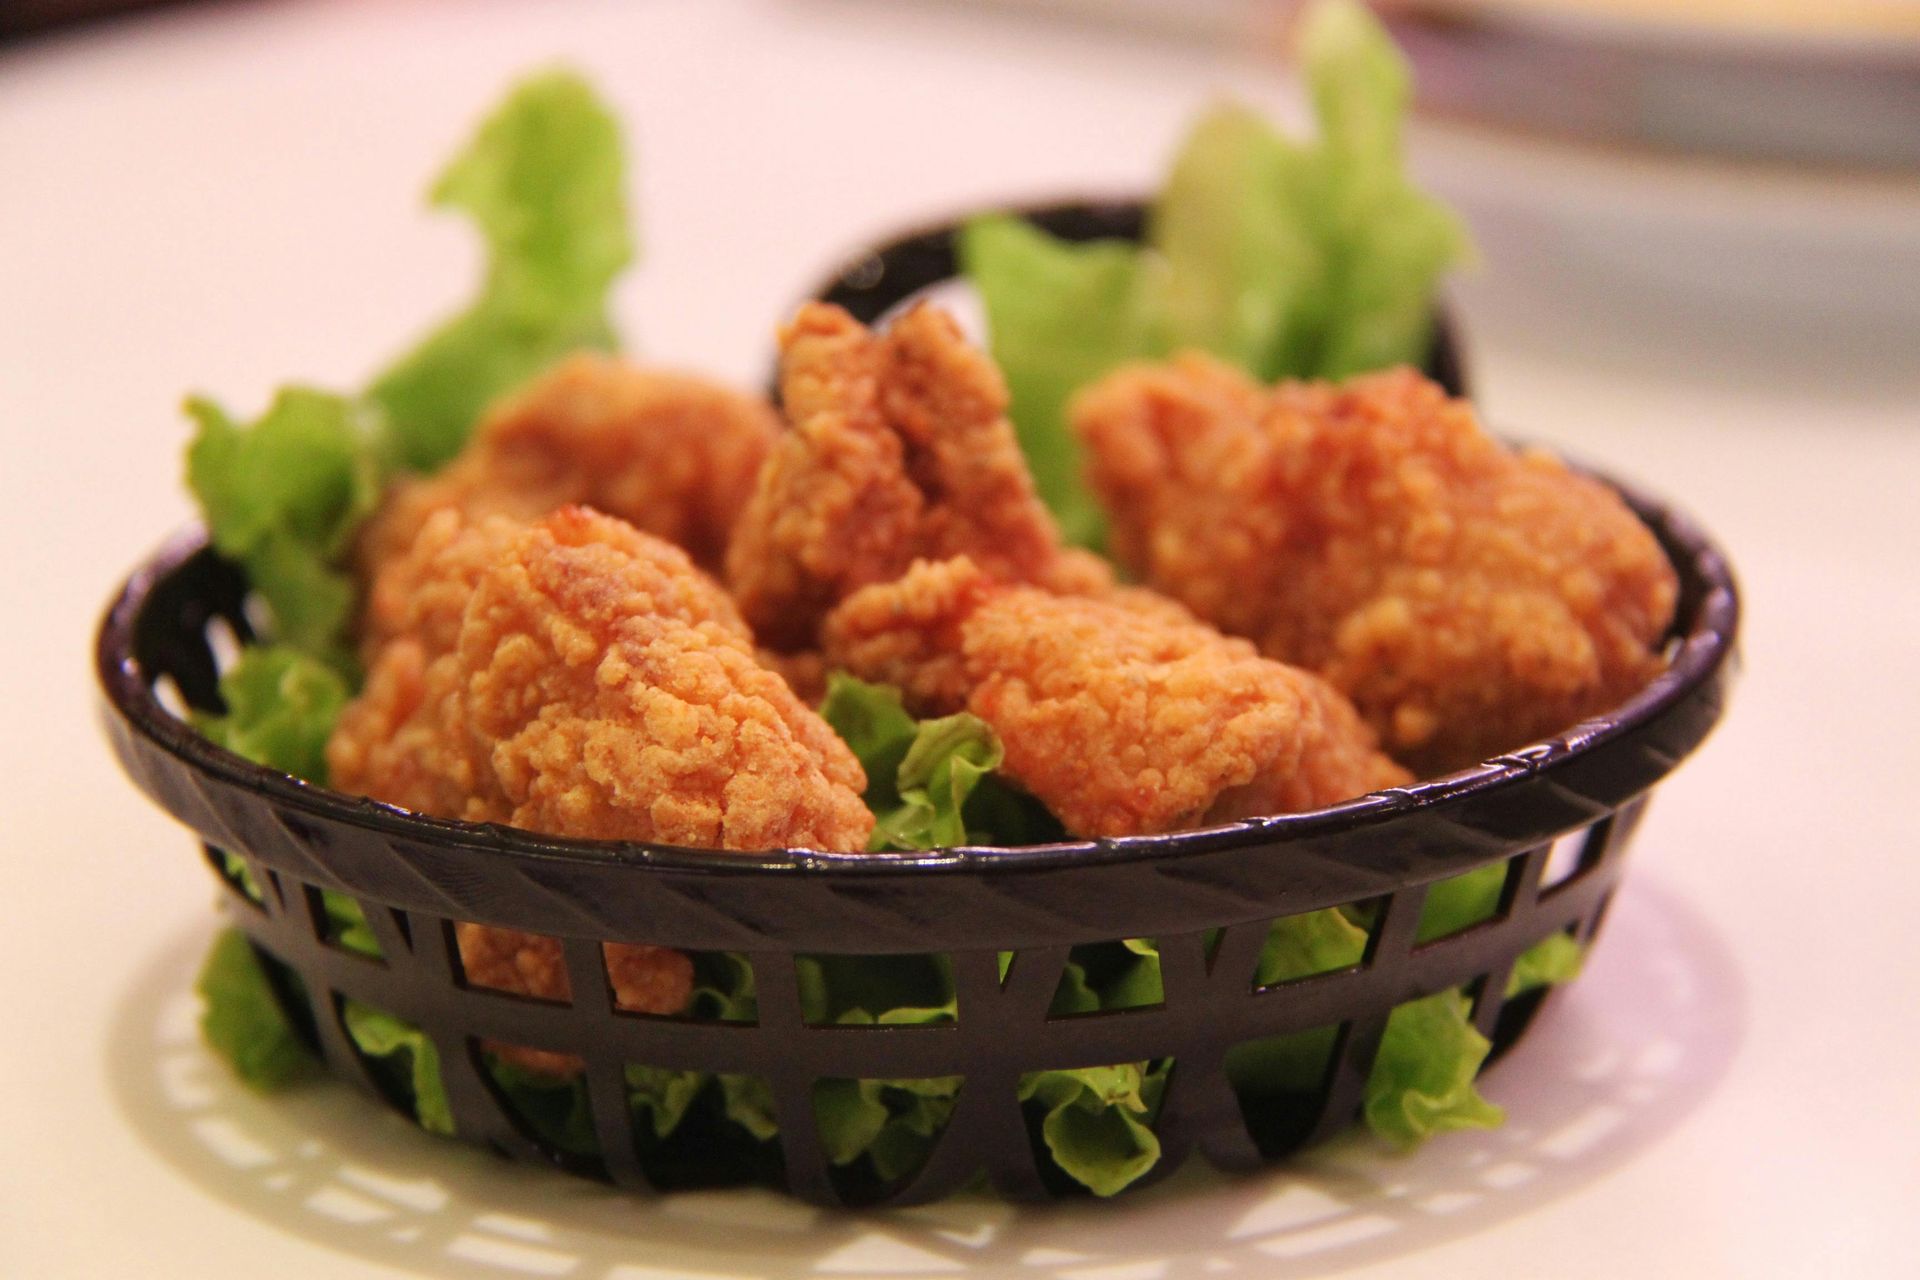 A basket filled with fried chicken and lettuce on a table.